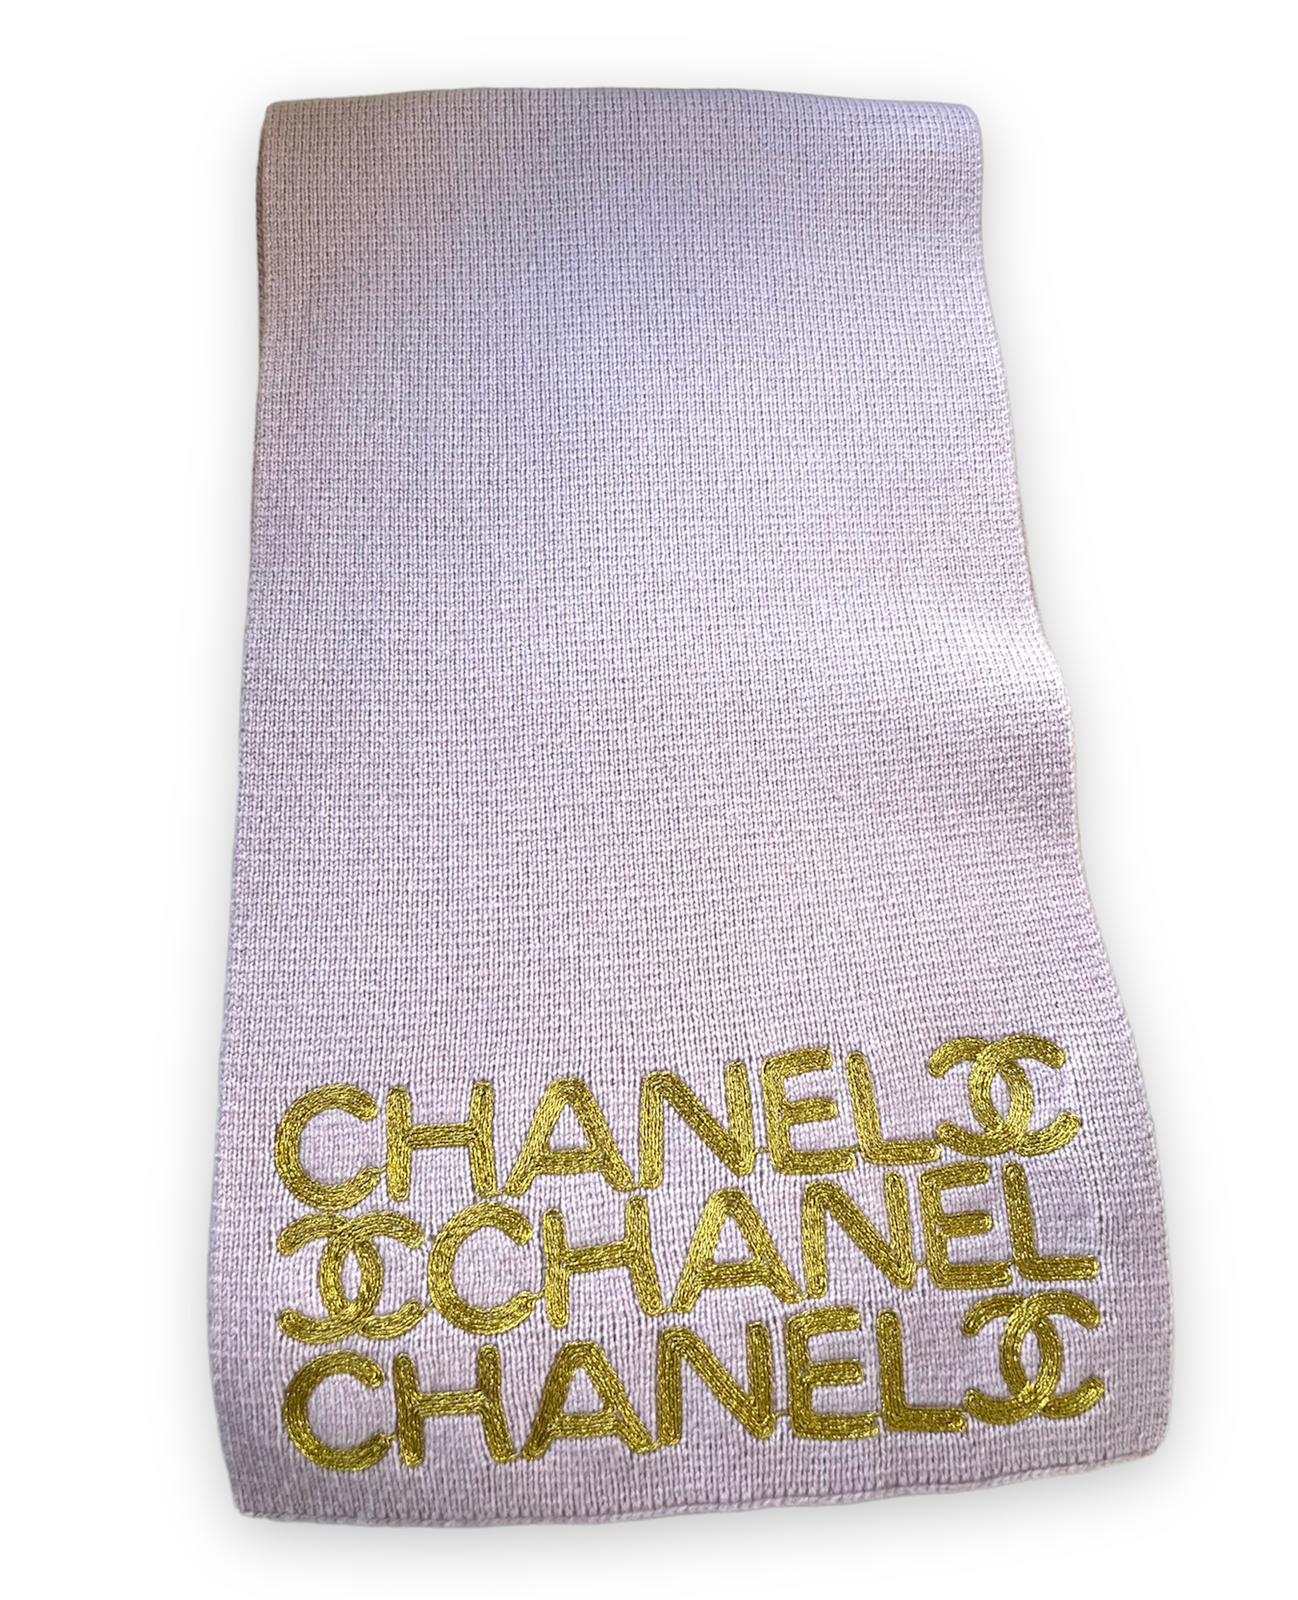 CHANEL Cashmere & Wool light pink scarf